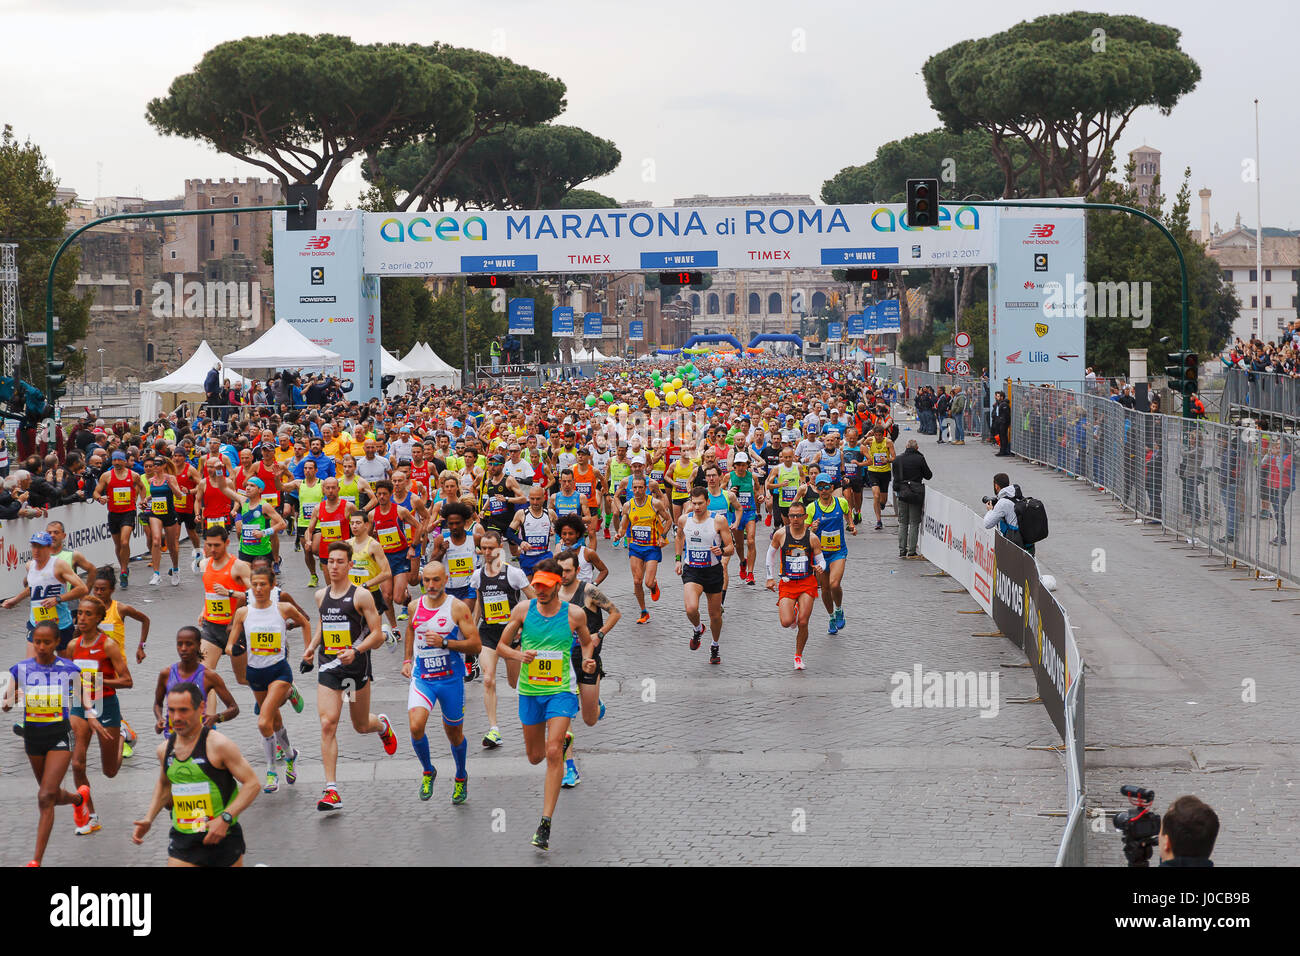 Rome, Italy - April 2, 2017: the departure of the athletes on Via dei Fori Imperiali, the Coliseum on background. Stock Photo